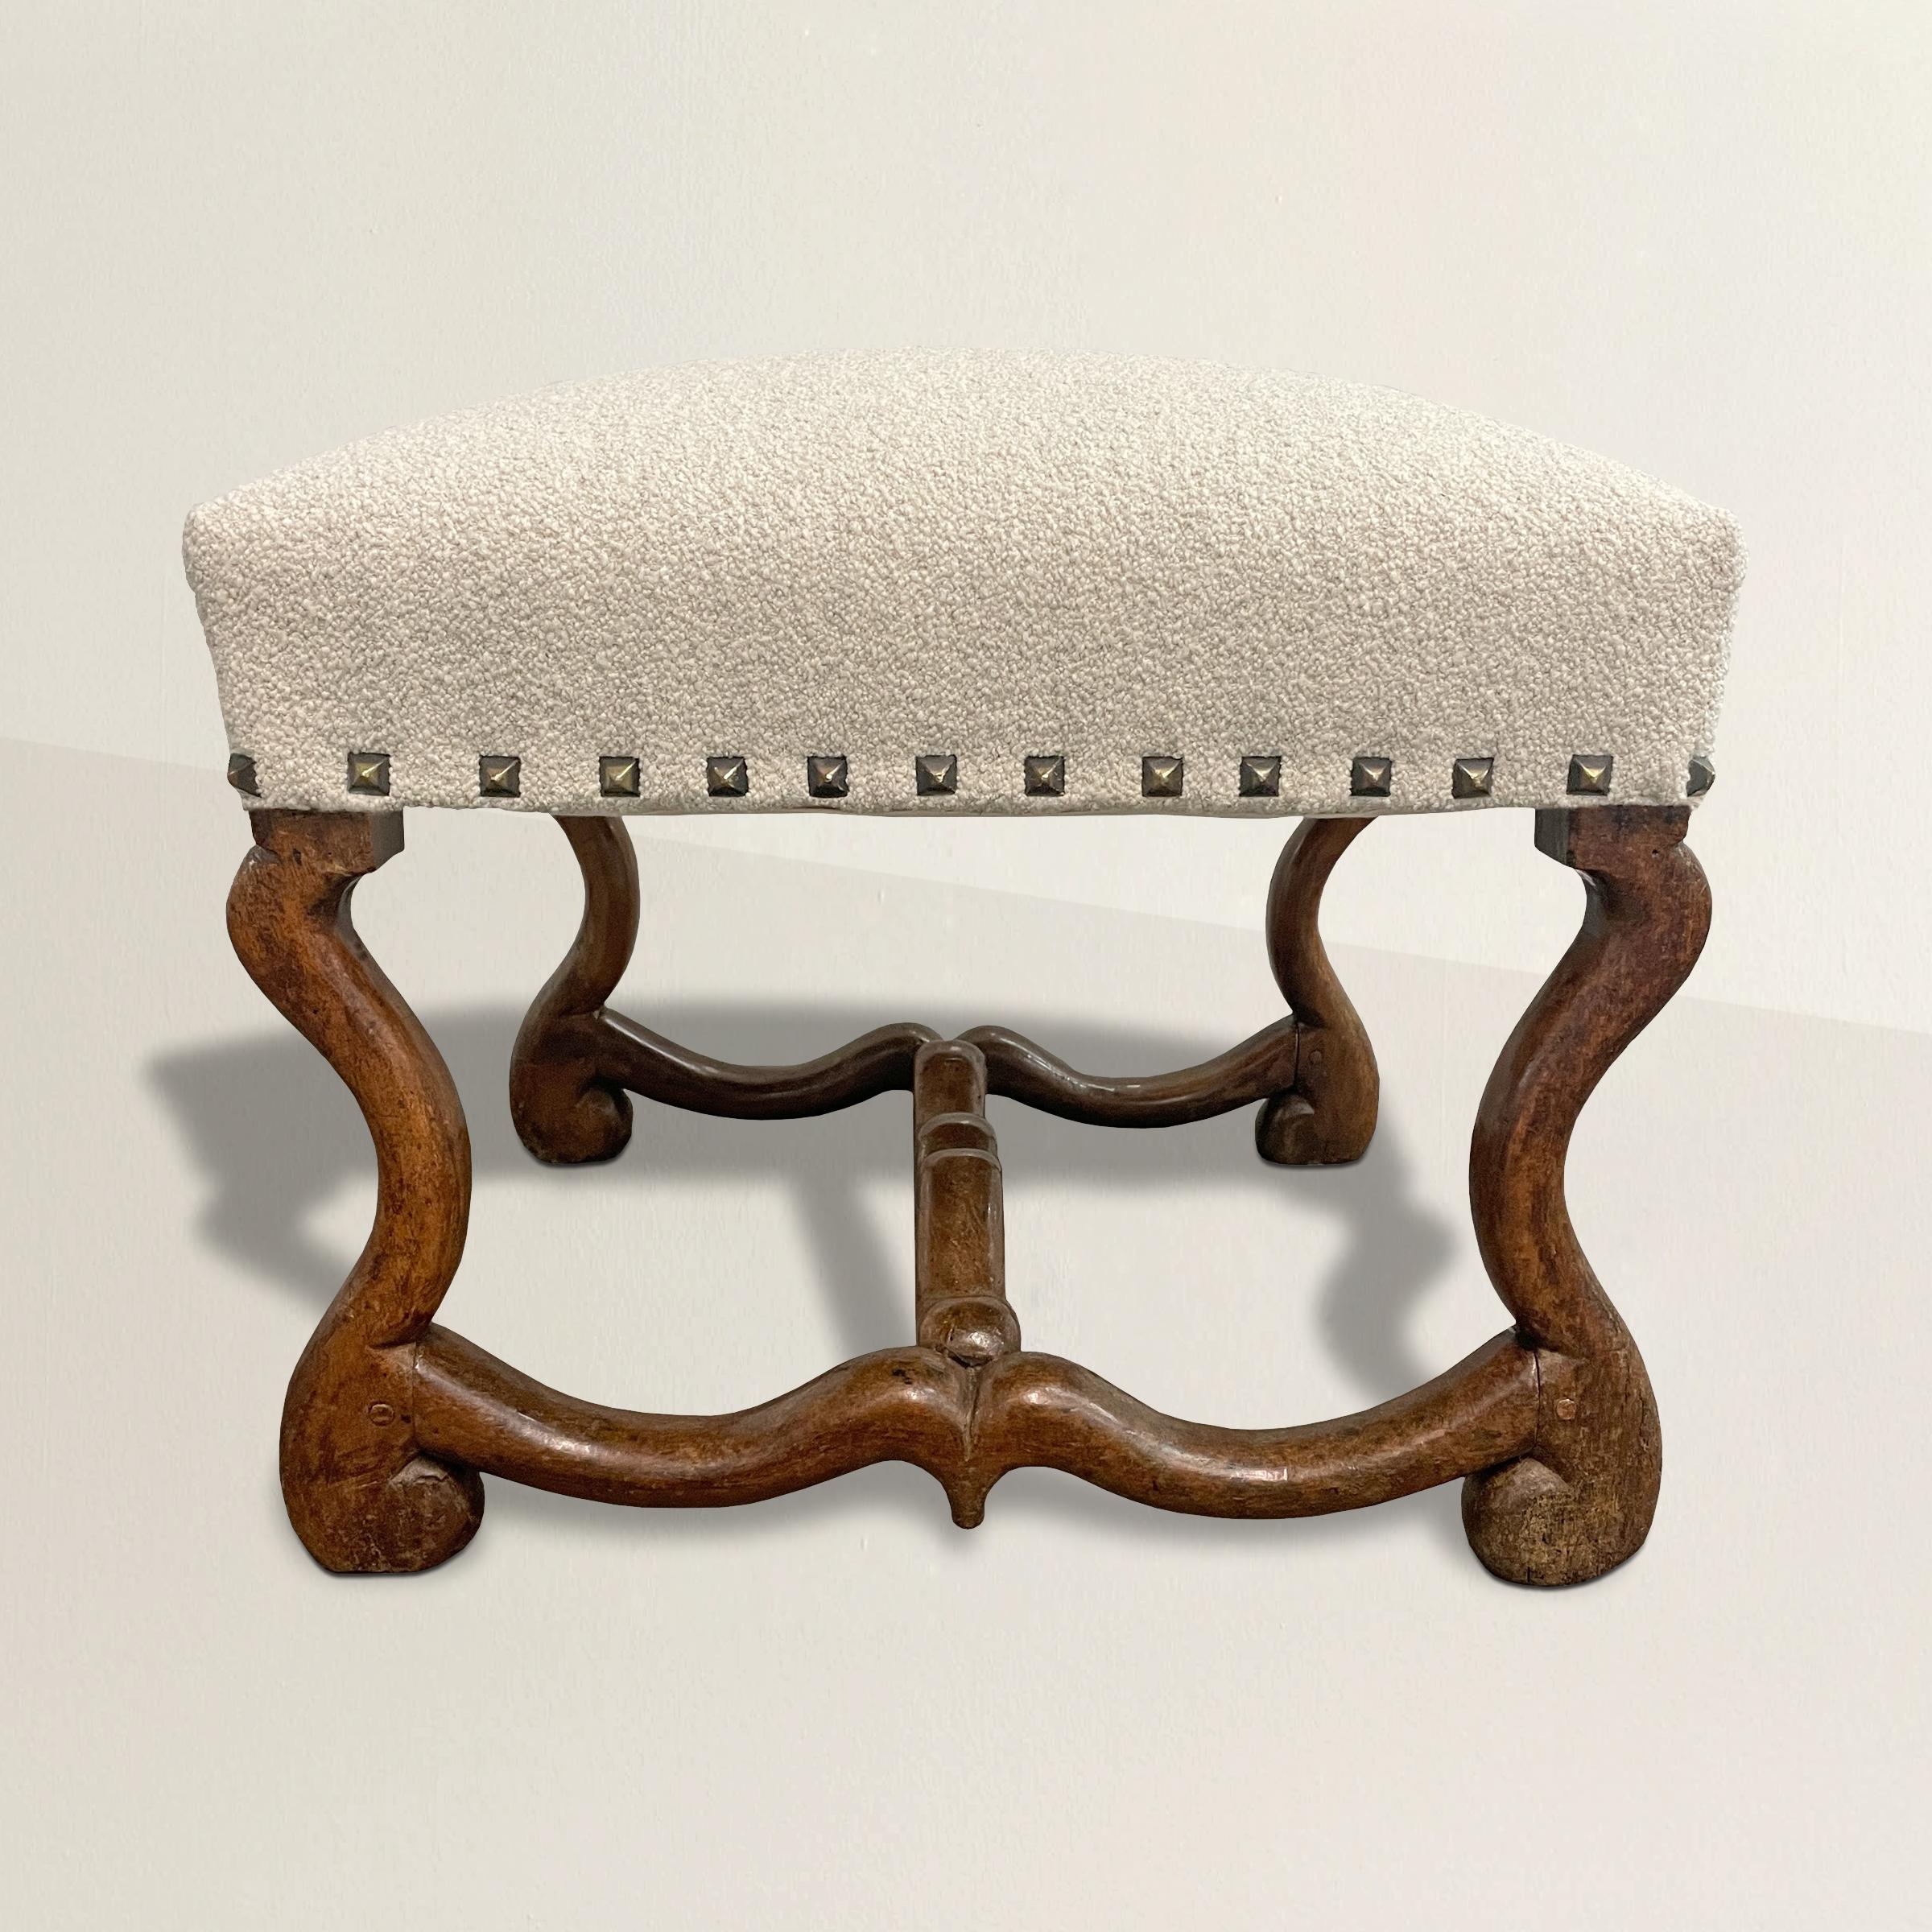 A wonderful 17th century French Louis XIII walnut os-de-mouton (sheep's bone) ottoman newly upholstered in a wool Italian bouclé and square pointed nail-head trim. Perfect as an ottoman at your favorite armchair, for extra seating in your living